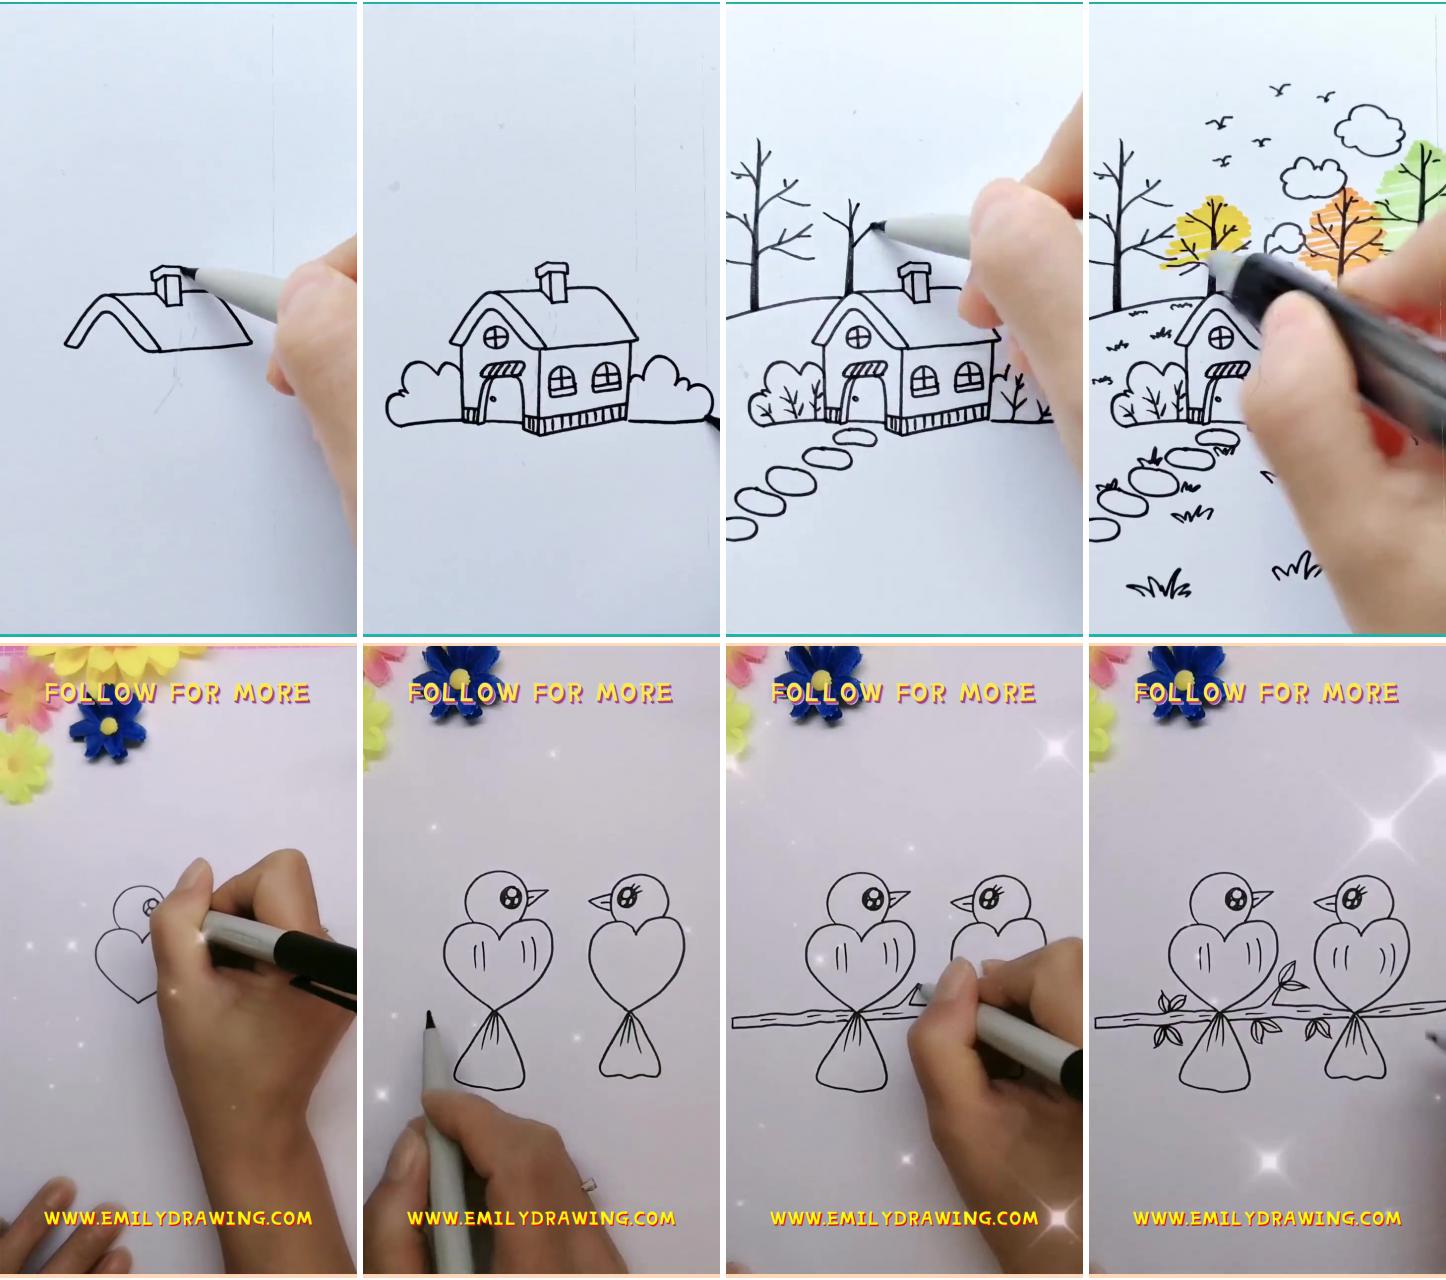 How to draw a house 10 minutes | how to draw bird step by step - learn how to draw